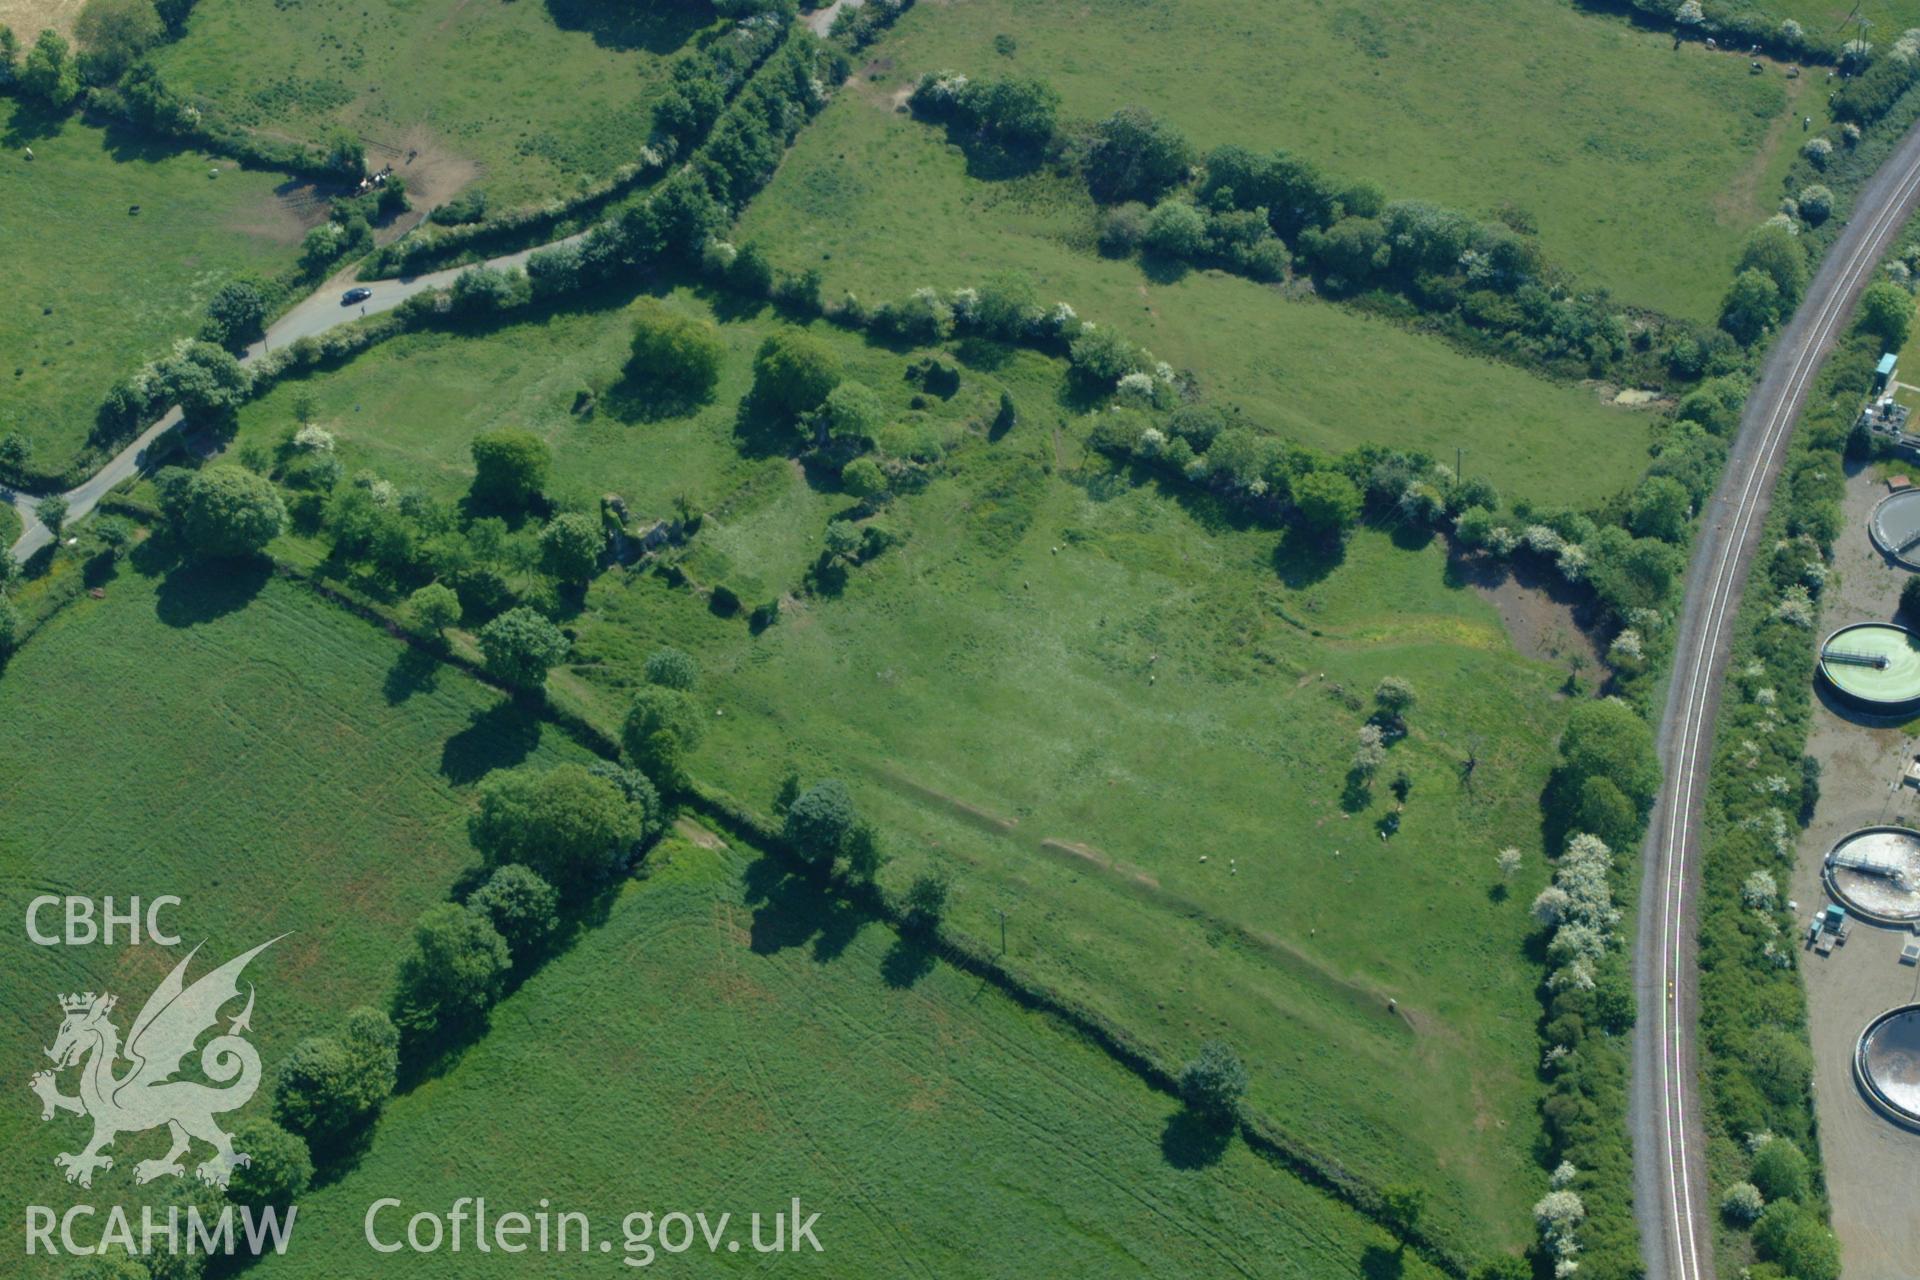 RCAHMW colour oblique aerial photograph of the ruins of Haroldston Mansion, Haverfordwest taken on 24/05/2004 by Toby Driver